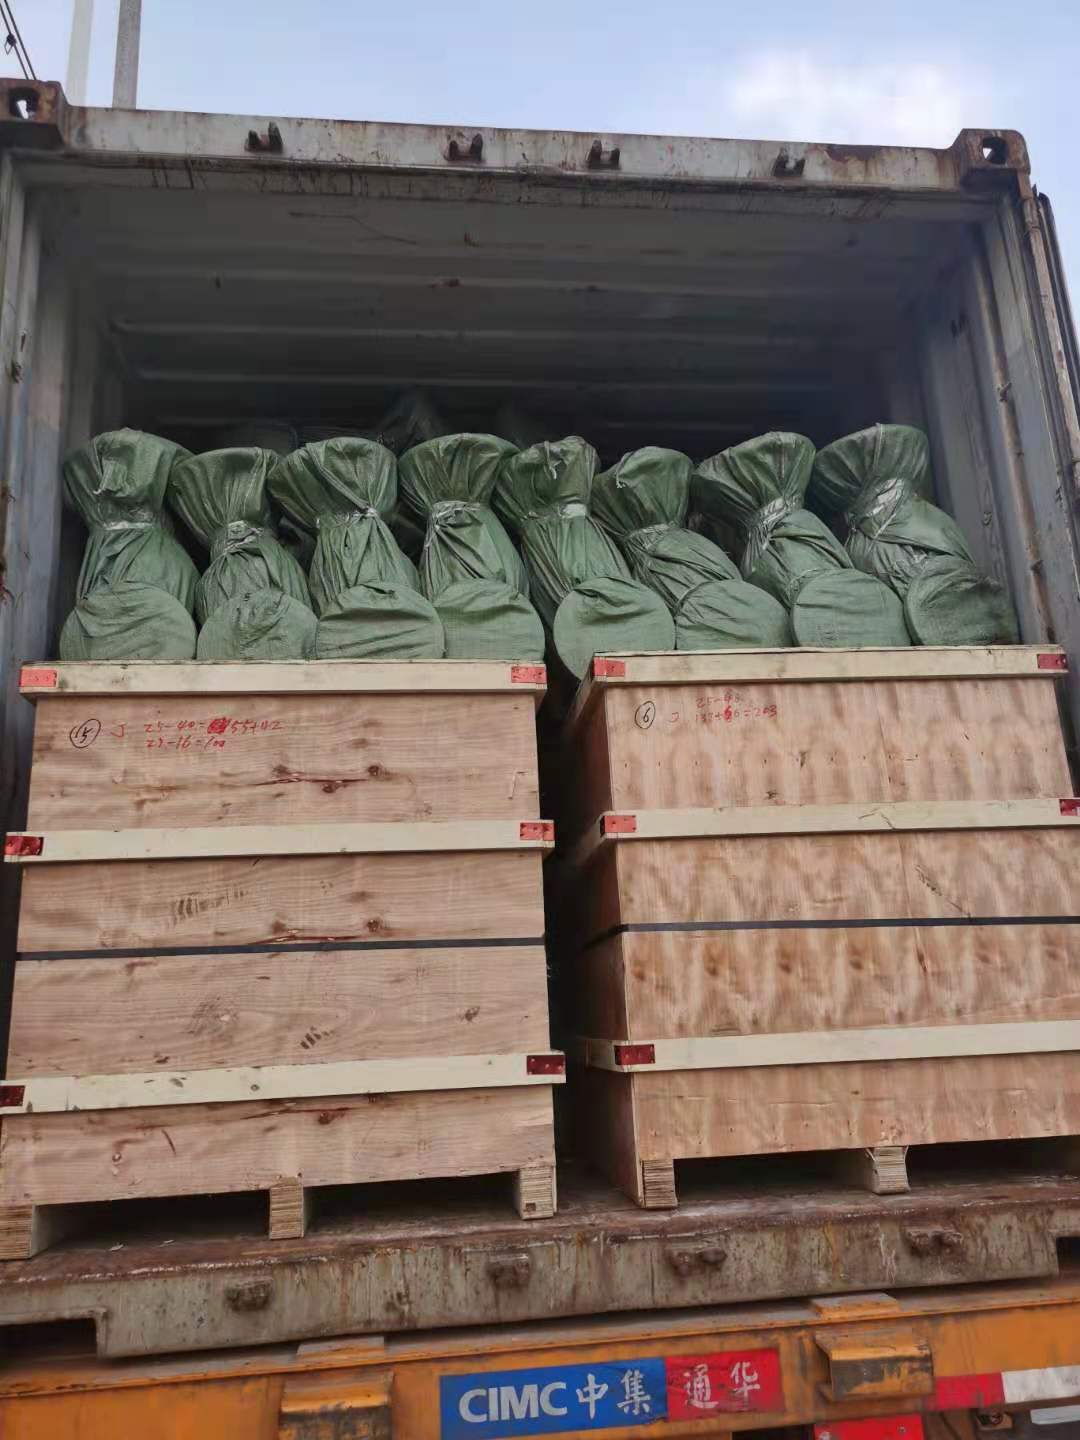 The latest heavy gate valves are shipped to Ukraine